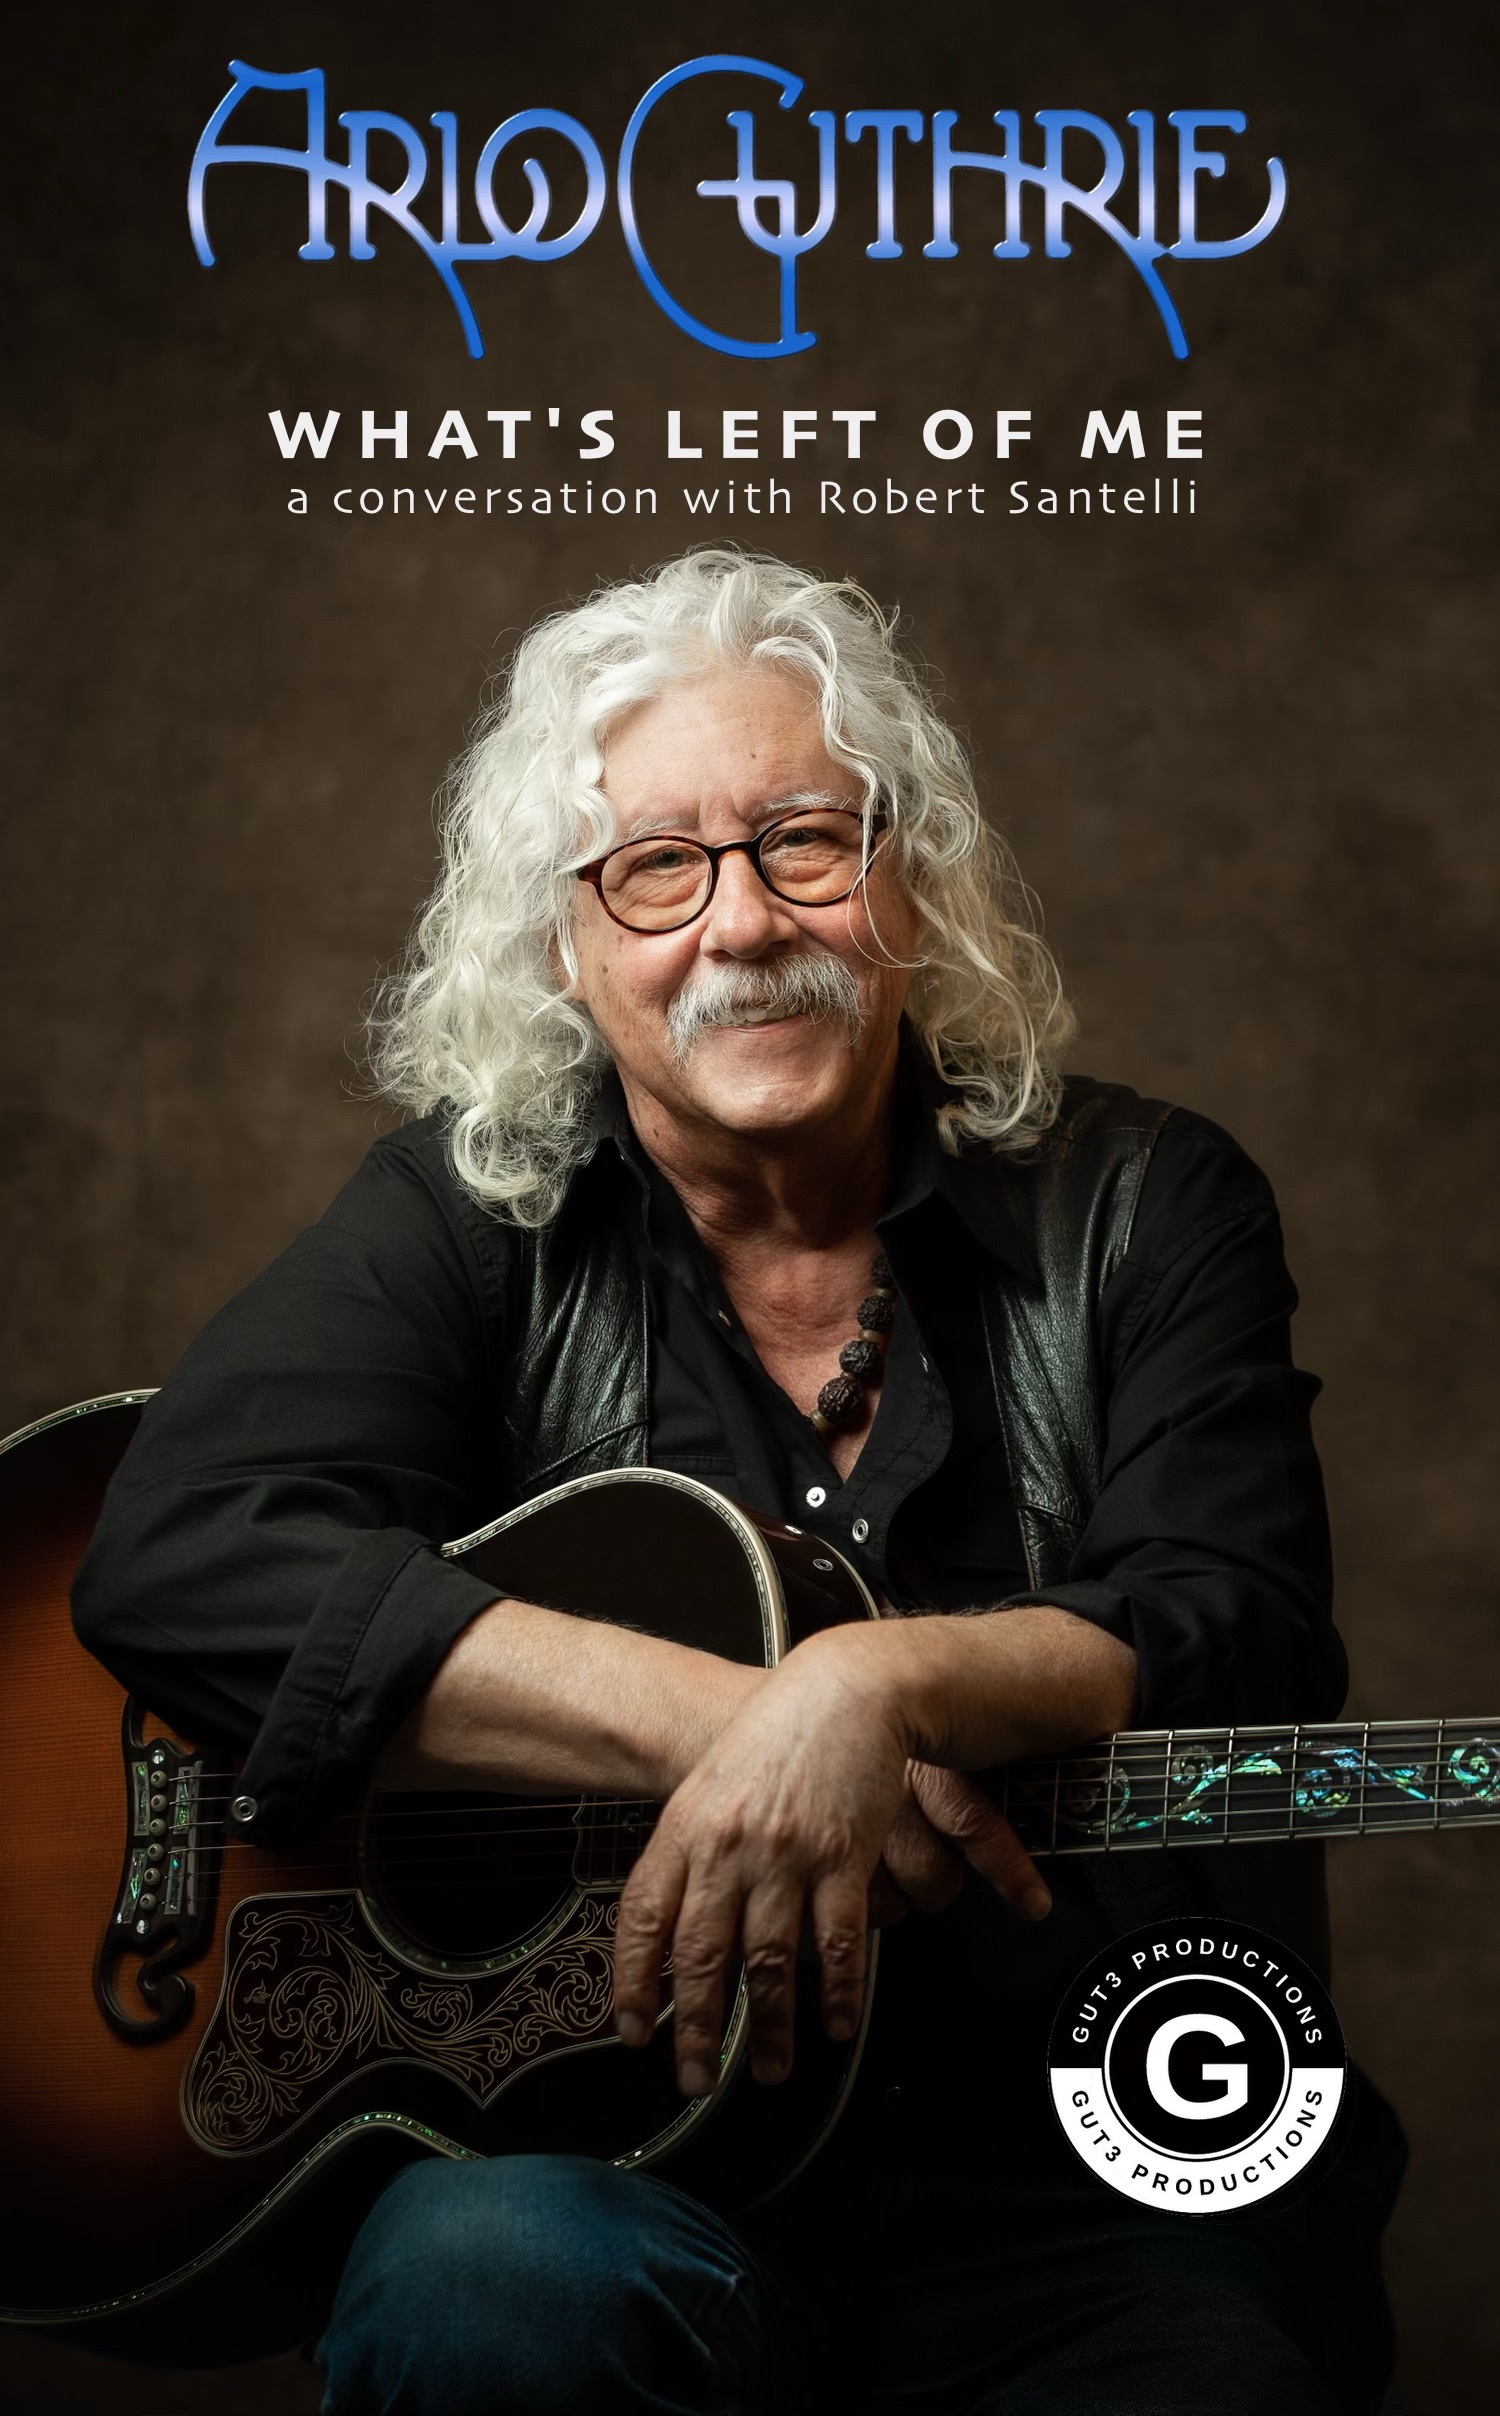 Arlo Guthrie Returns to the Stage After Three Years of Retirement for a